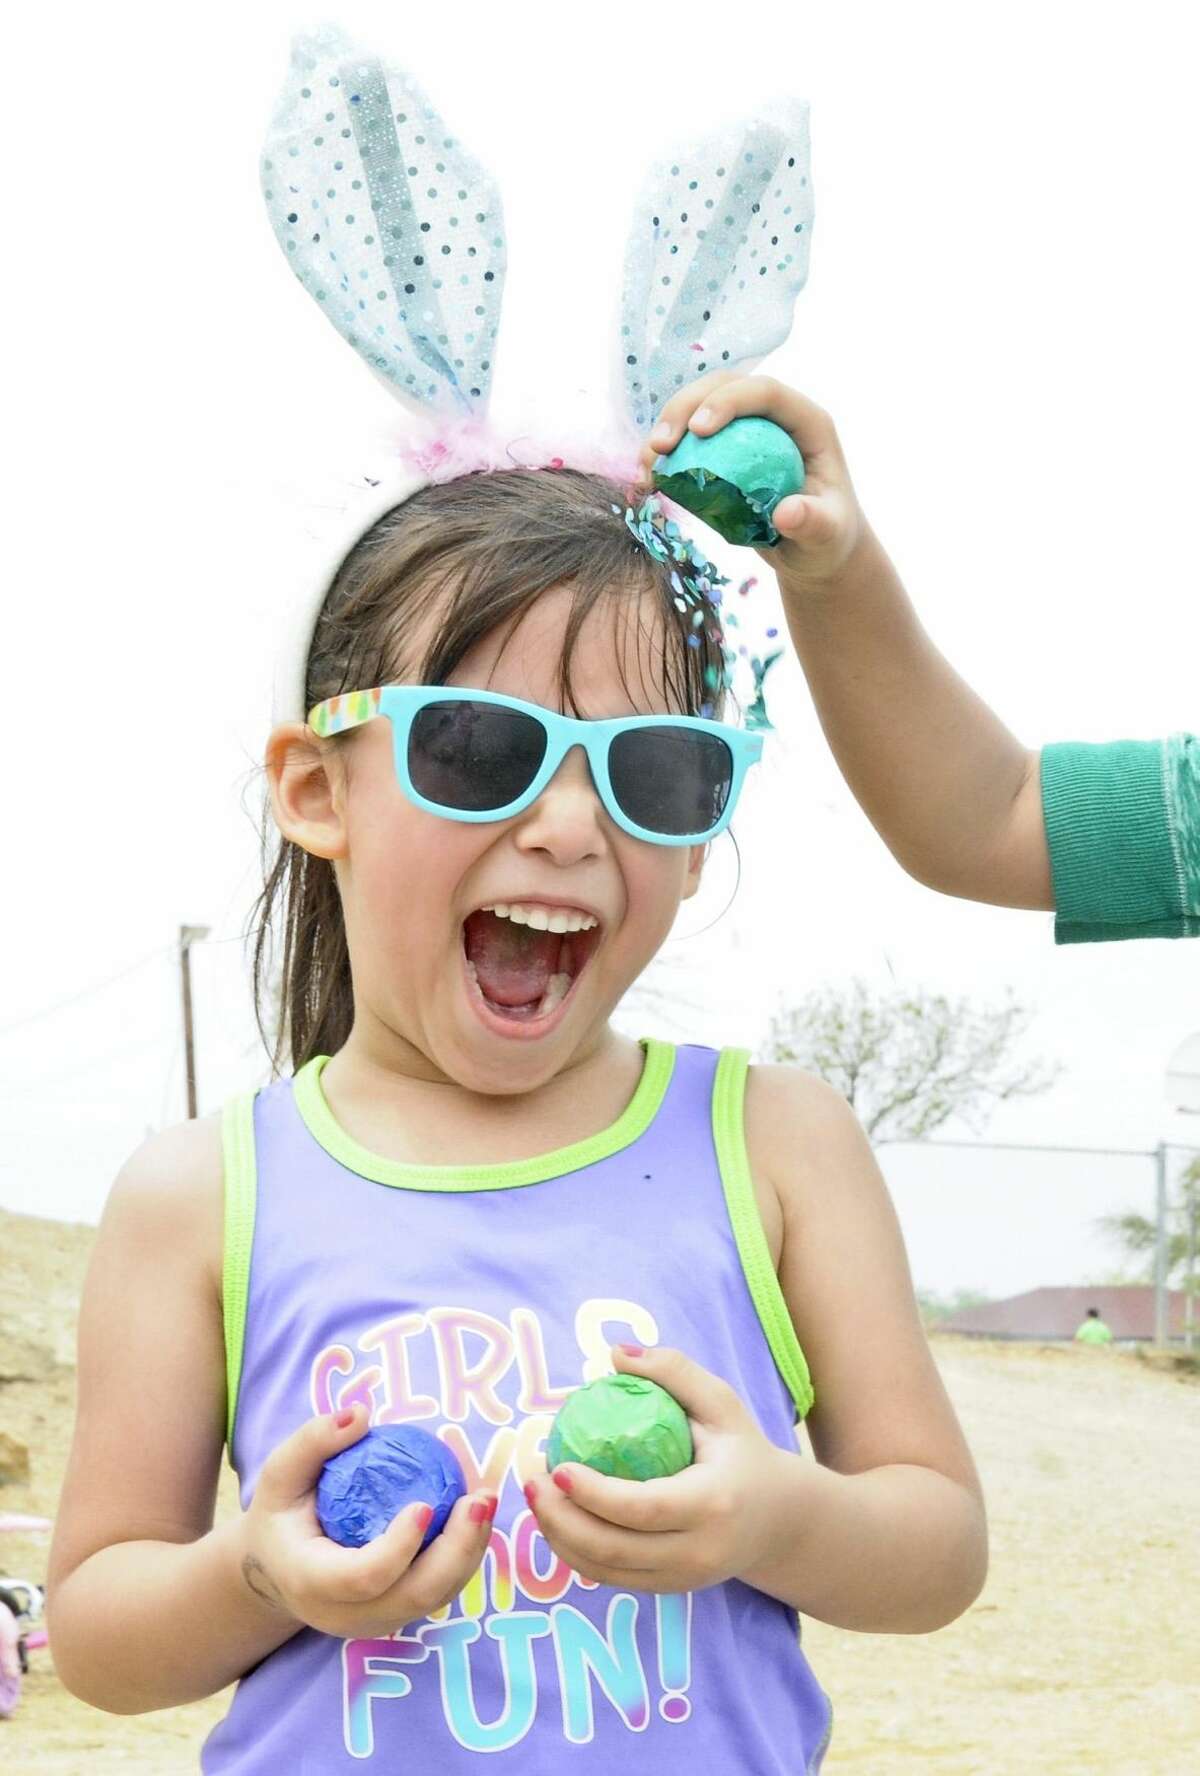 Madison Ruiz reacts as her friend cracks an Easter egg on her head at Lake Casa Blanca on Easter Sunday. Thousands of people flock to the lake every year to enjoy the day. (Photo by Ulysses S. Romero/Laredo Morning Times)